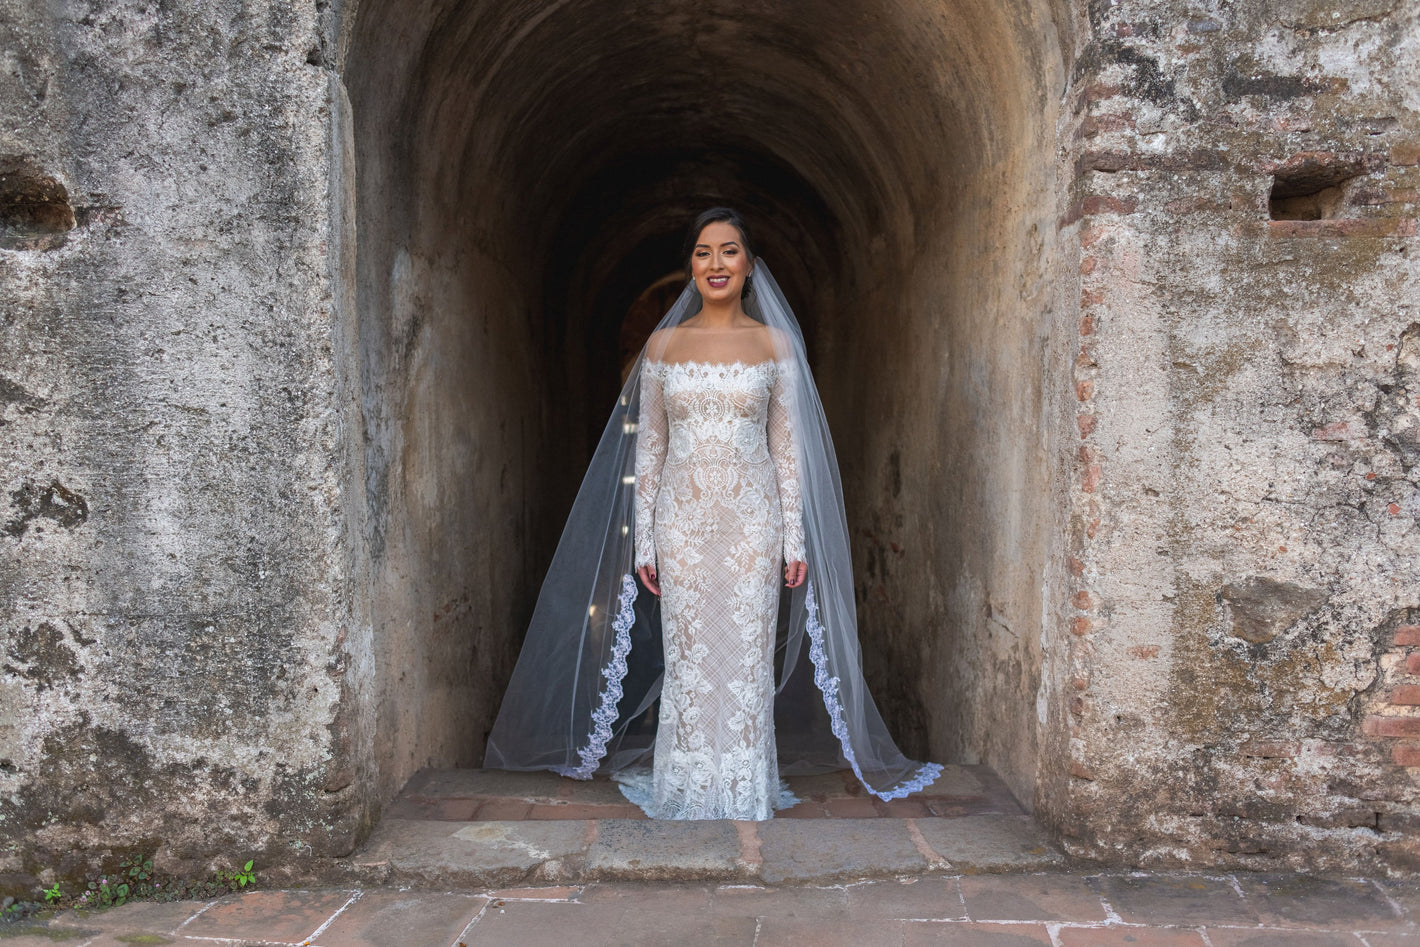 romantic cathedral length lace veil with lace trim and off the shoulder bridal dress as bride stands in Mexican archway